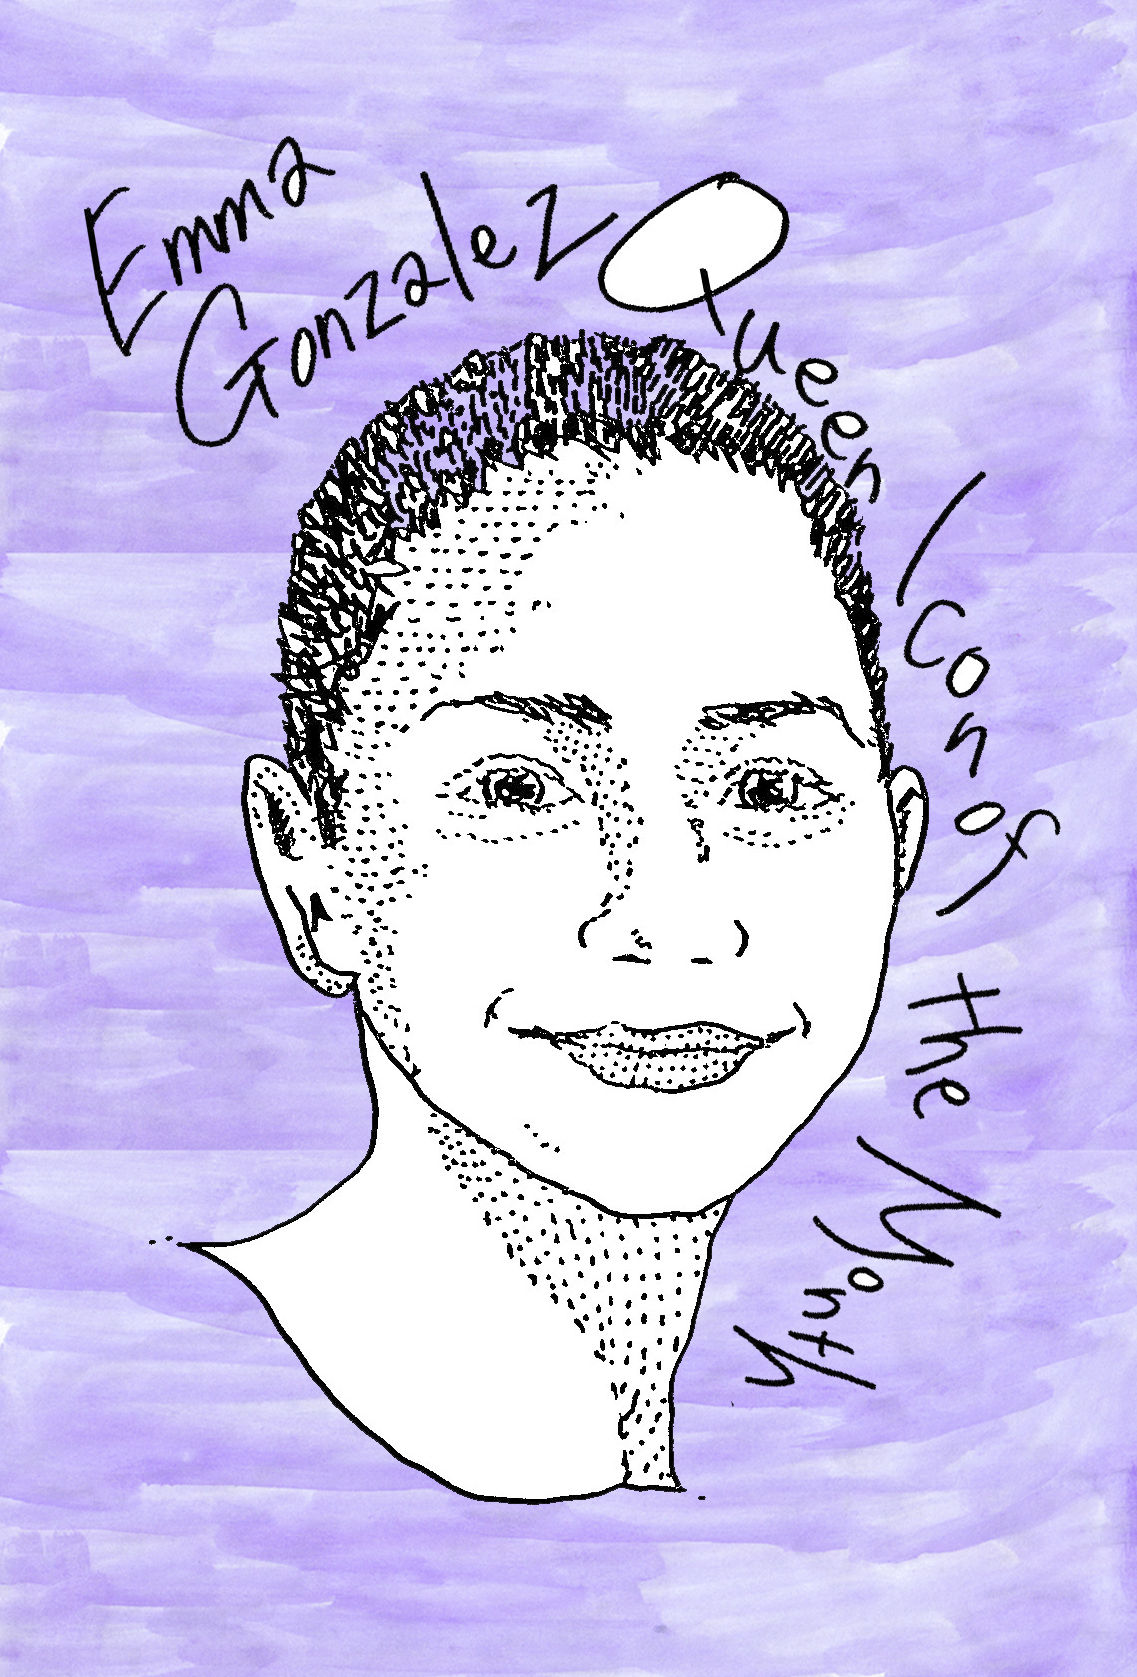 Emma González: Queer Icon of the Month. Artwork by Kiki Saito. Text by Amelie Eckersley